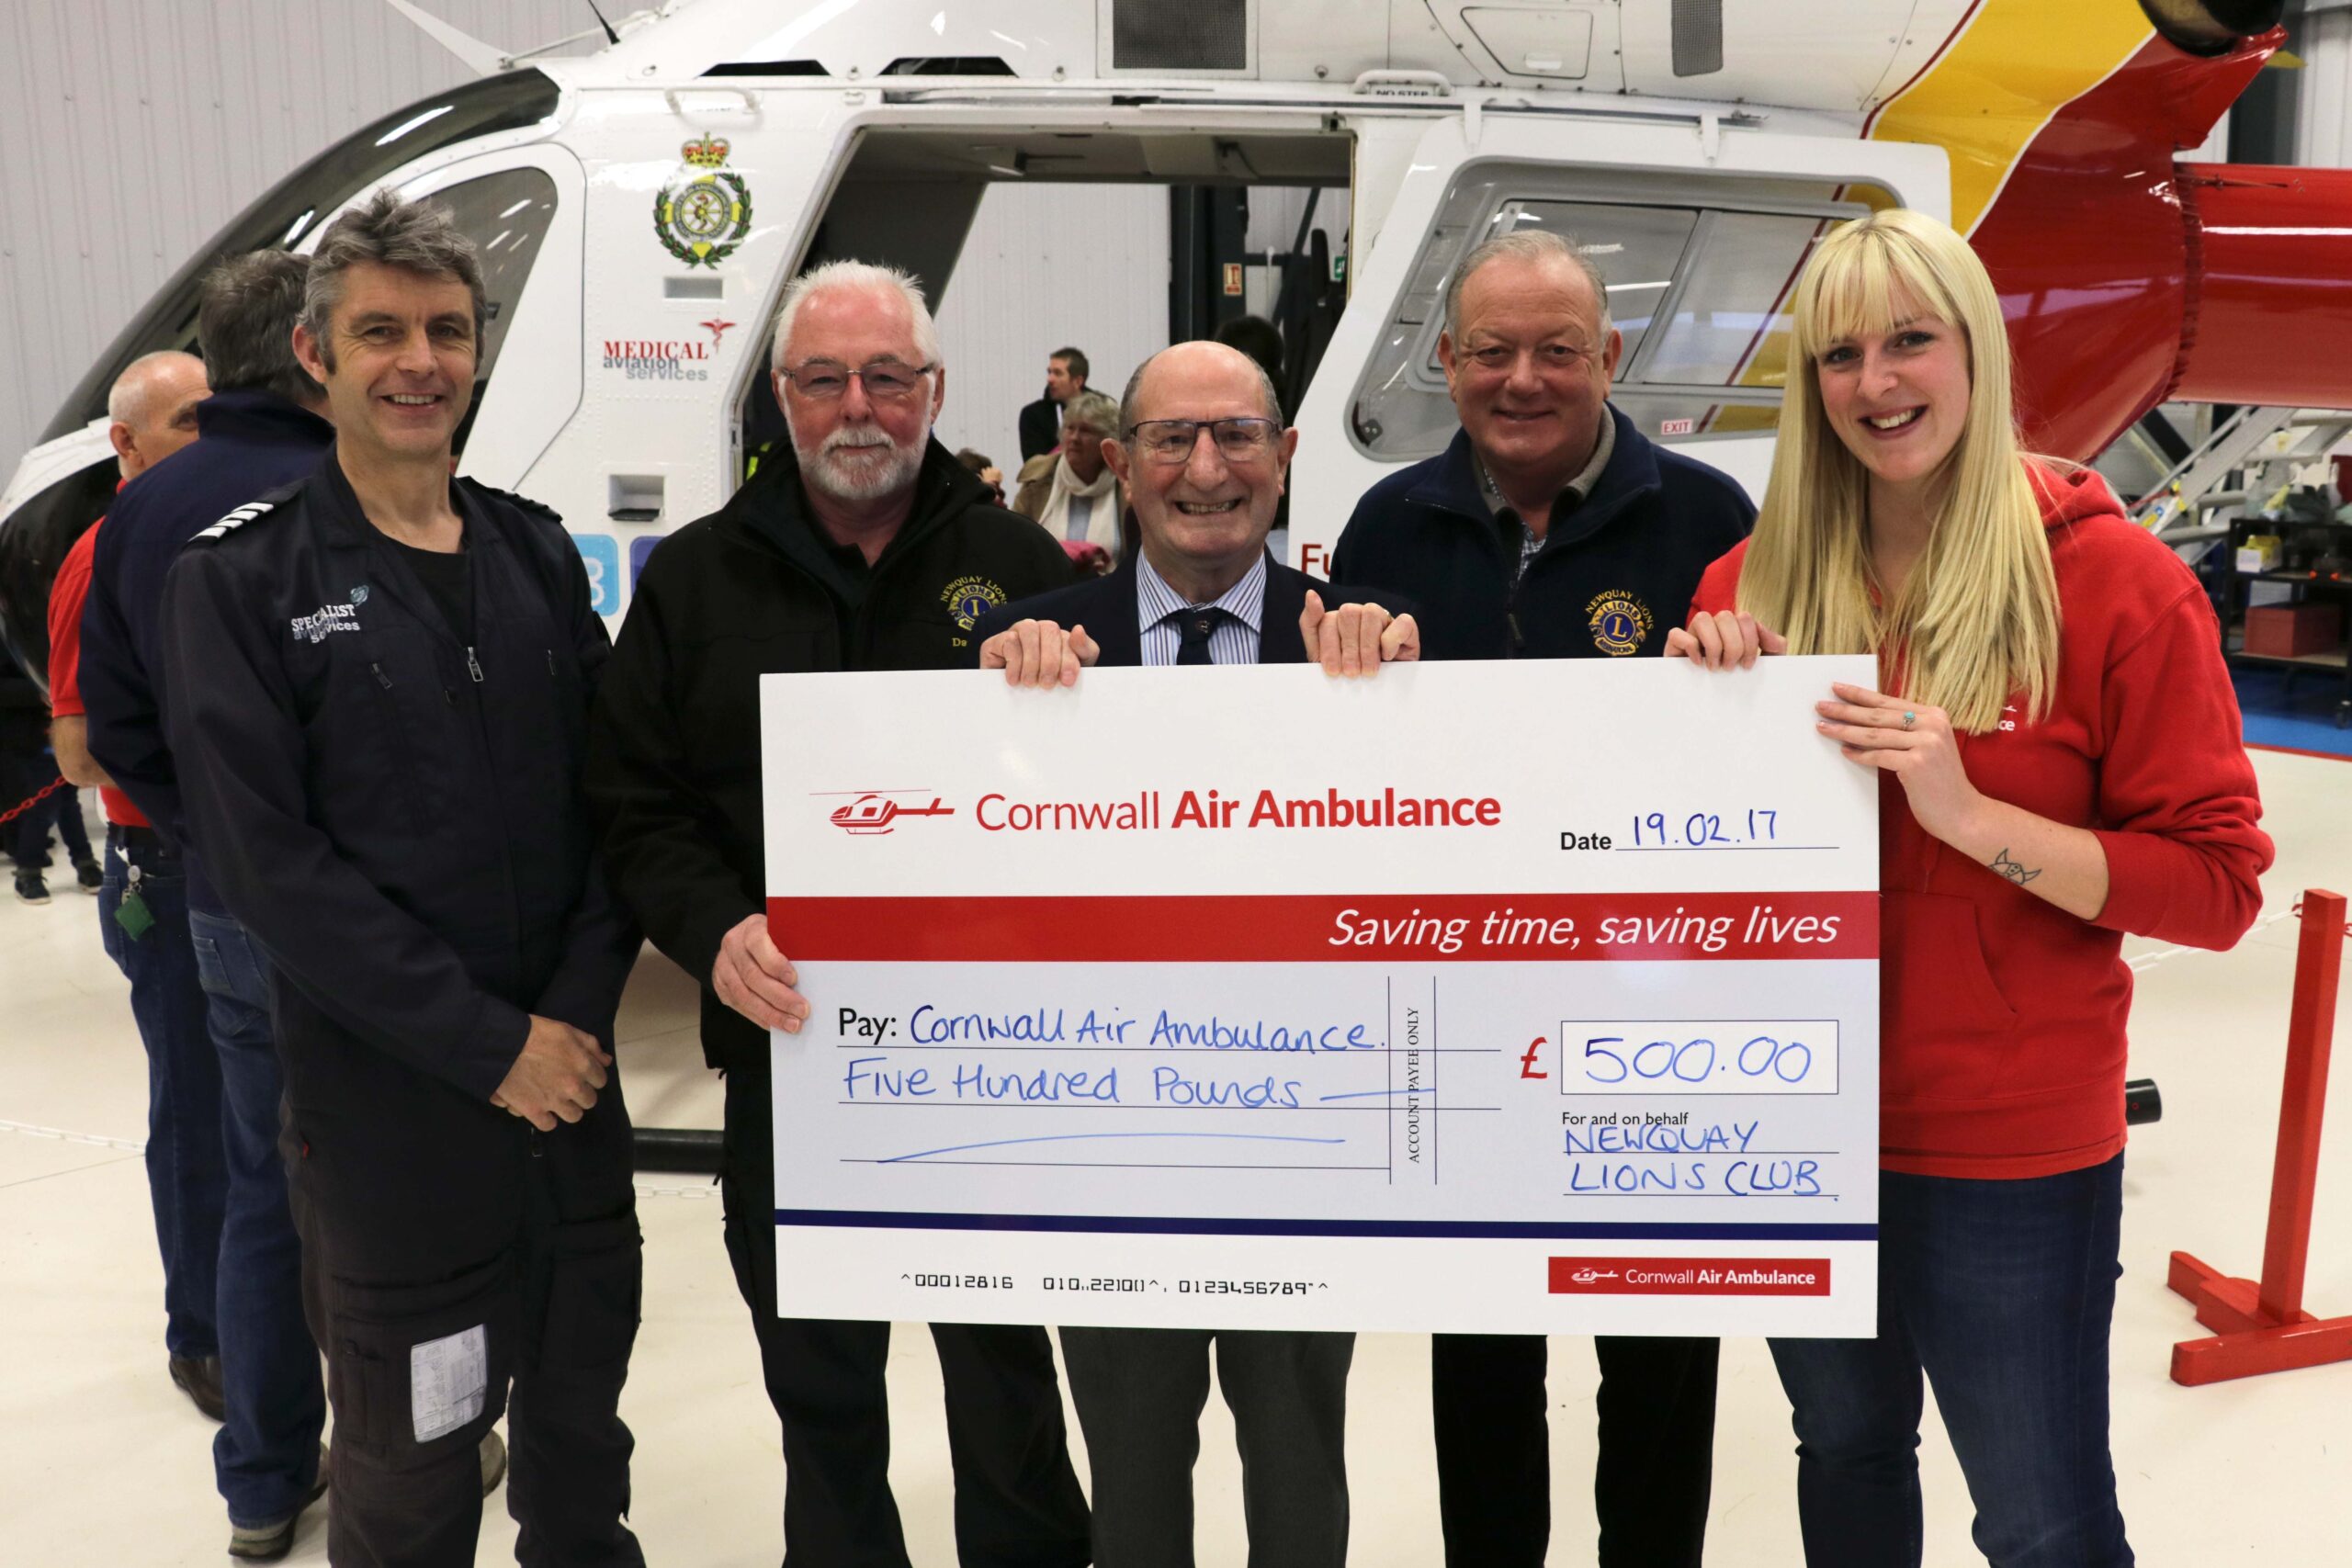 L-R Captain Criag Webster, David Hall (Newquay Lions), Denis Dent (Newquay Lions), Graham Wilmott (Newquay Lions) Becky Wise (Cornwall Air Ambulance fundraiser)